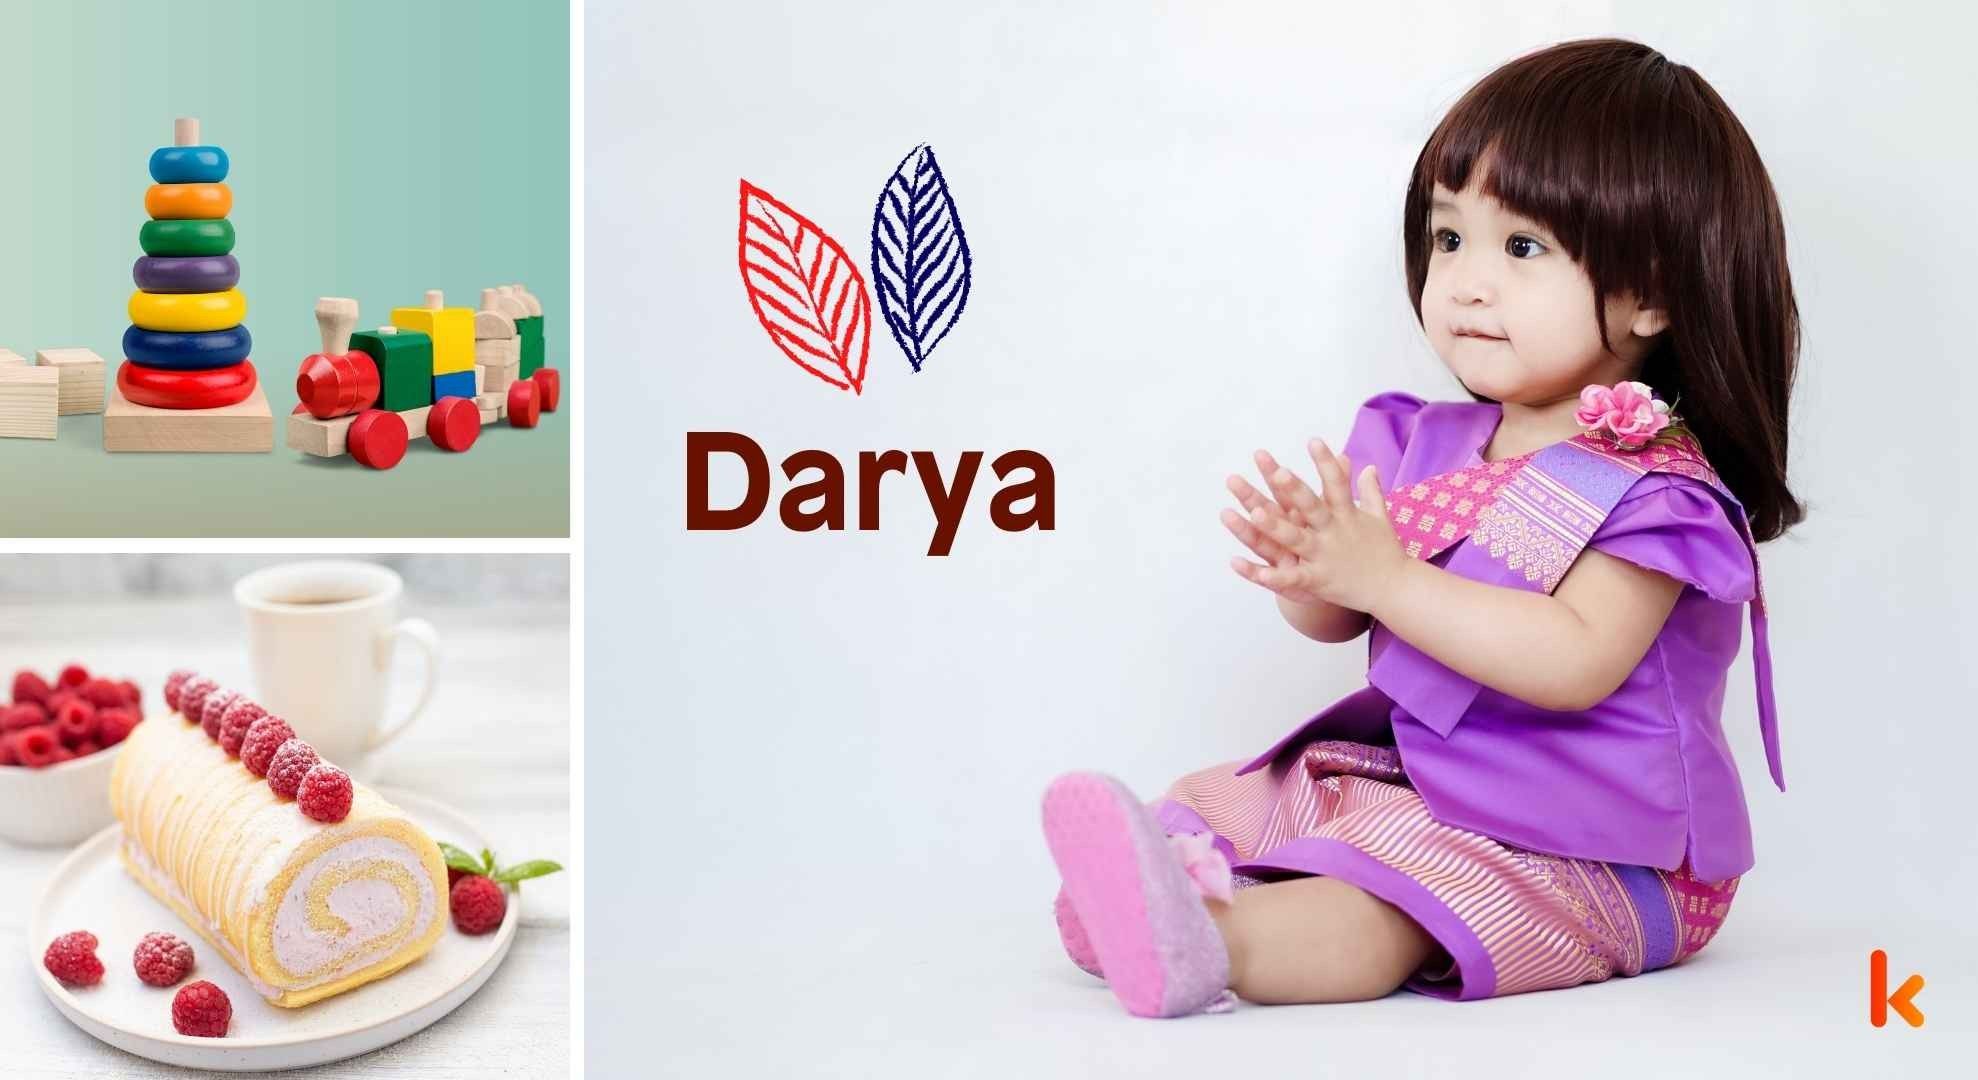 Meaning of the name Darya